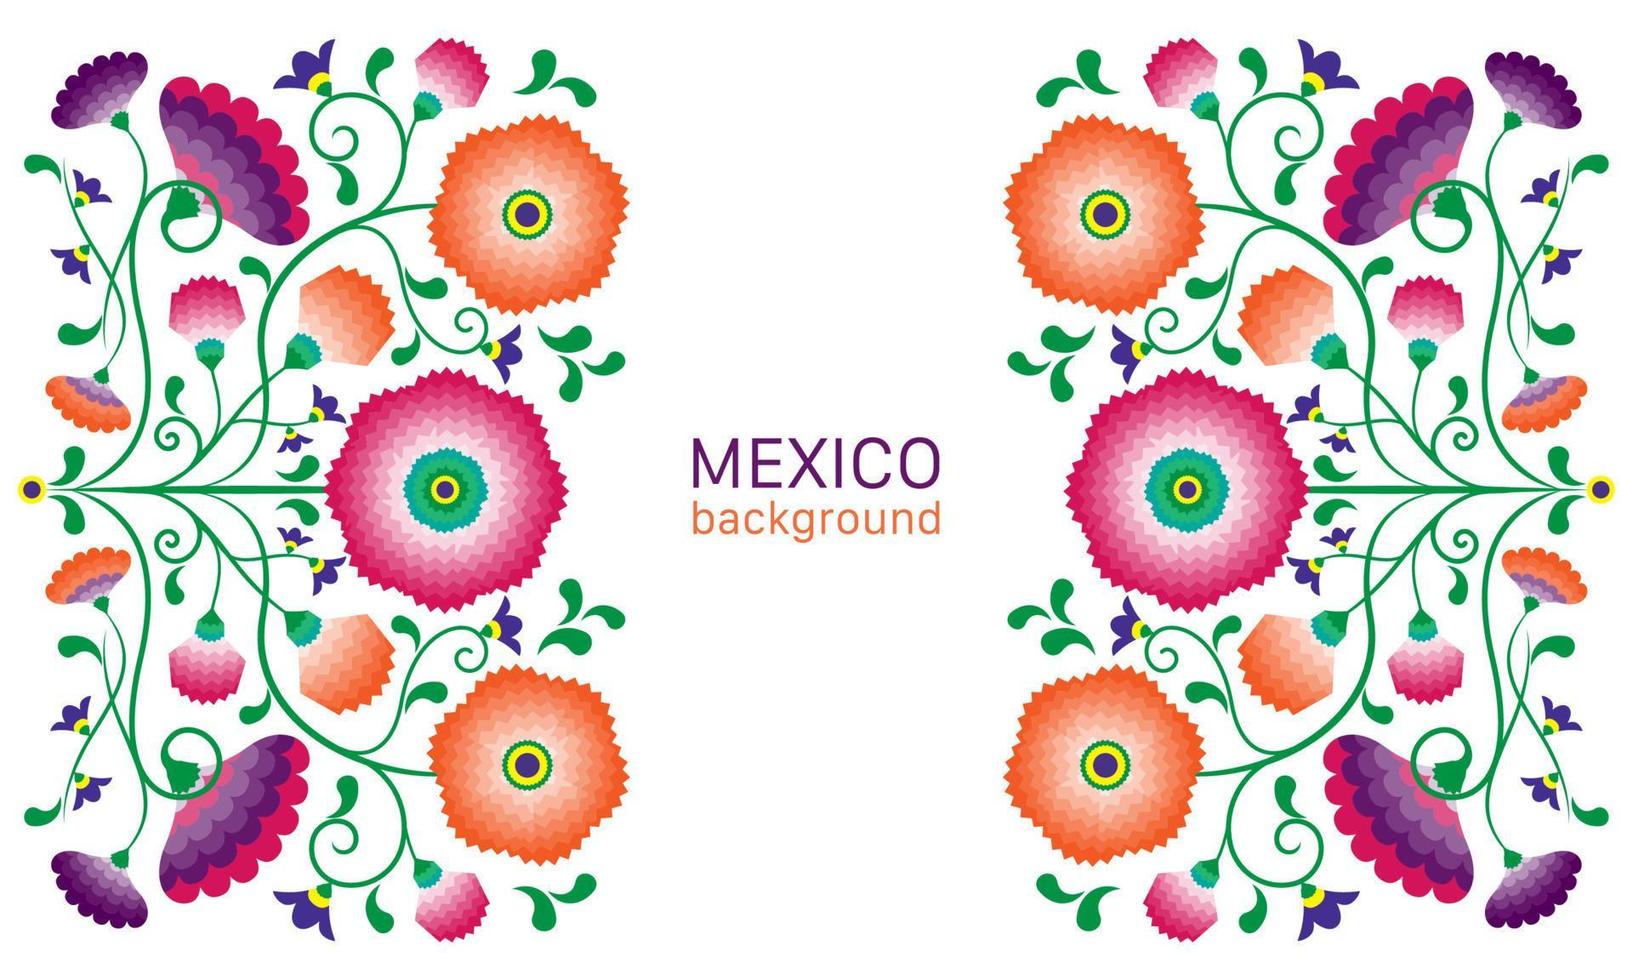 Embroidery native flowers folk pattern with Polish and Mexican influence. Trendy ethnic decorative traditional floral in symmetric design, for fashion, interior, stationery. Vector isolated on white